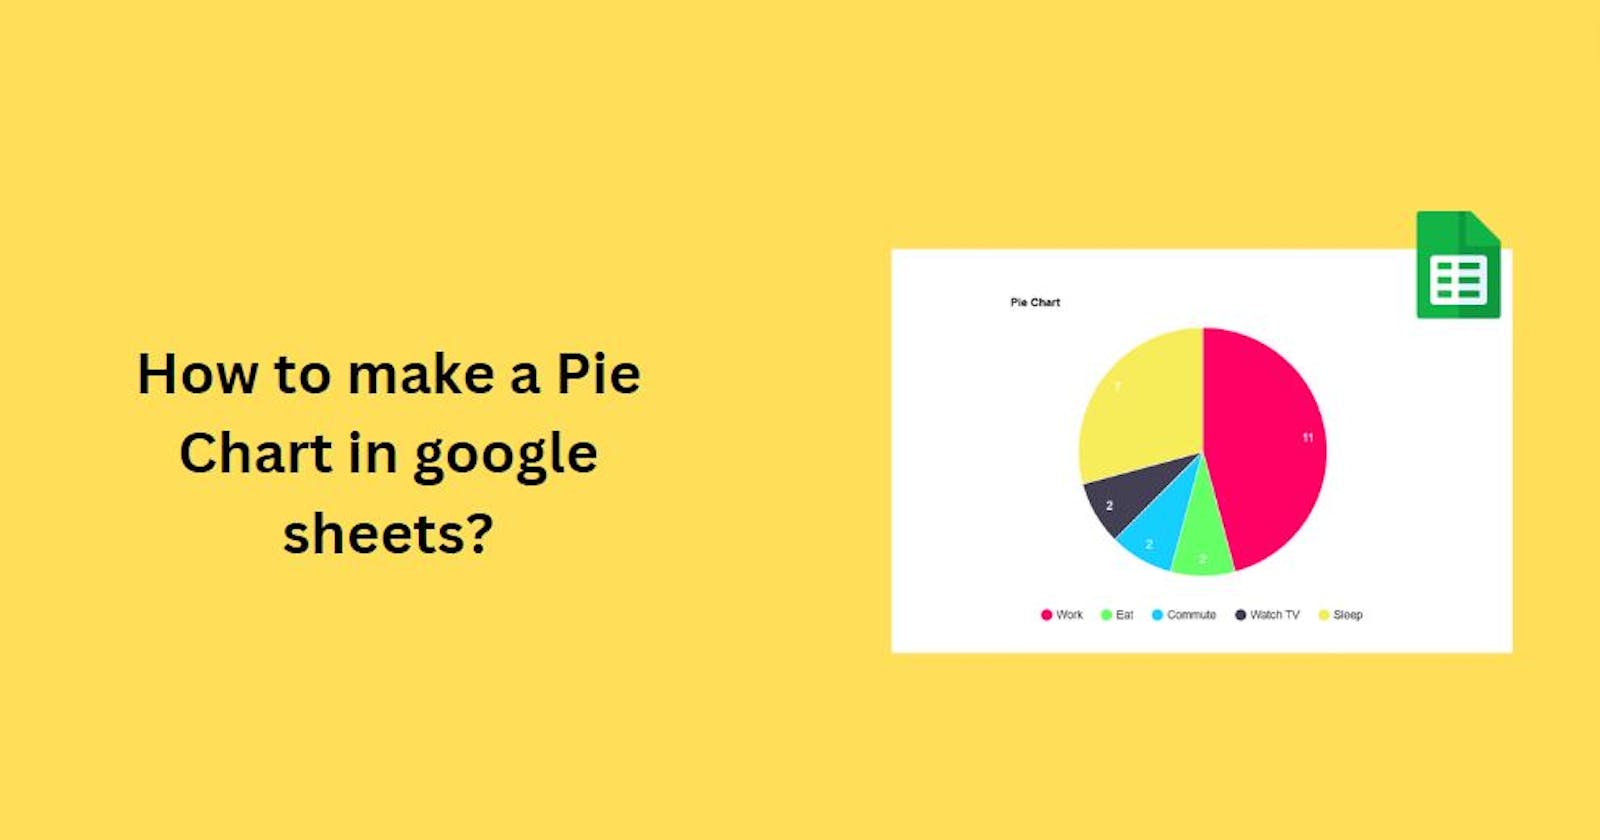 How to make a Pie Chart in google sheets?